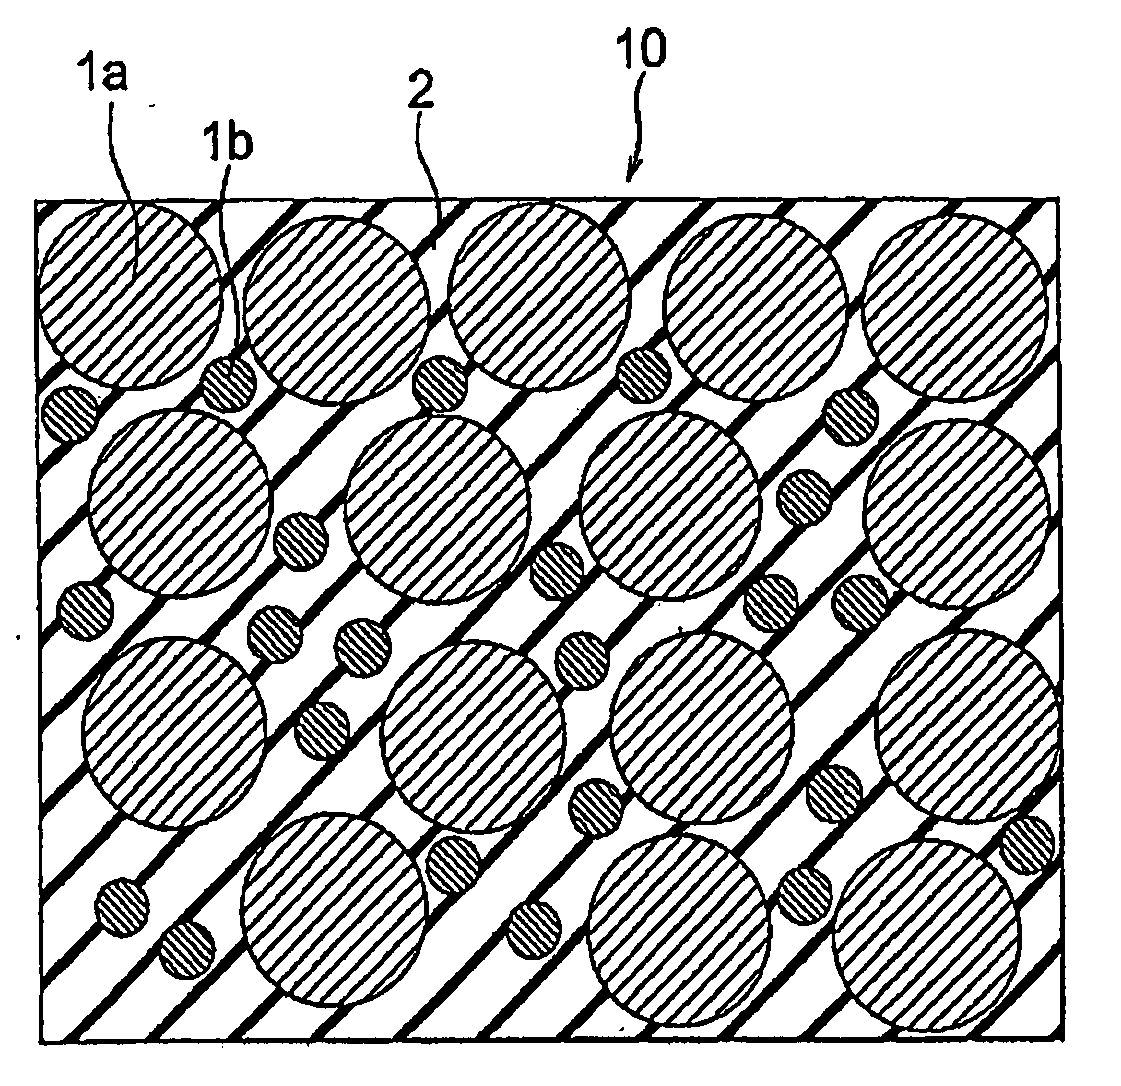 Magnetic Substance-Containing Insulator and Circuit Board and Electronic Device Using the Same